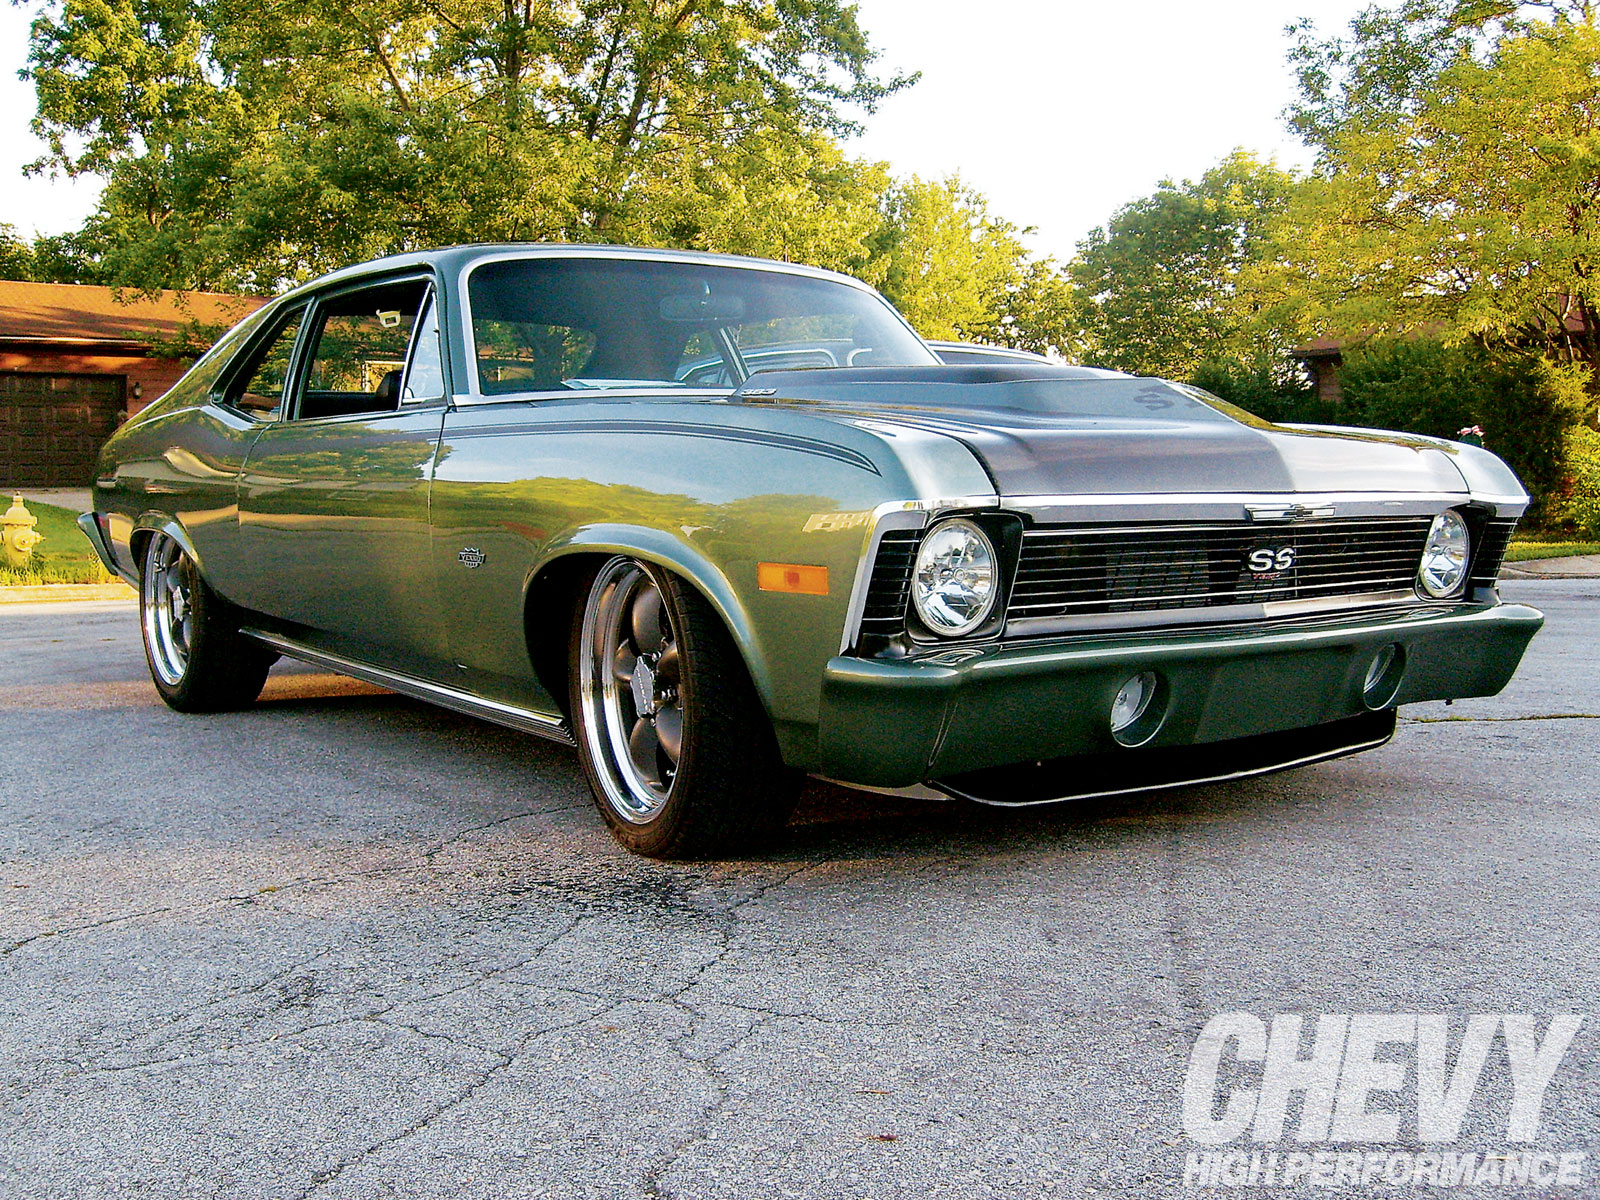 Read all about this completely customized 1971 Chevy Nova SS. Only at www.chevyhiperformance.com, the official website for Chevy High Performance Magazine!